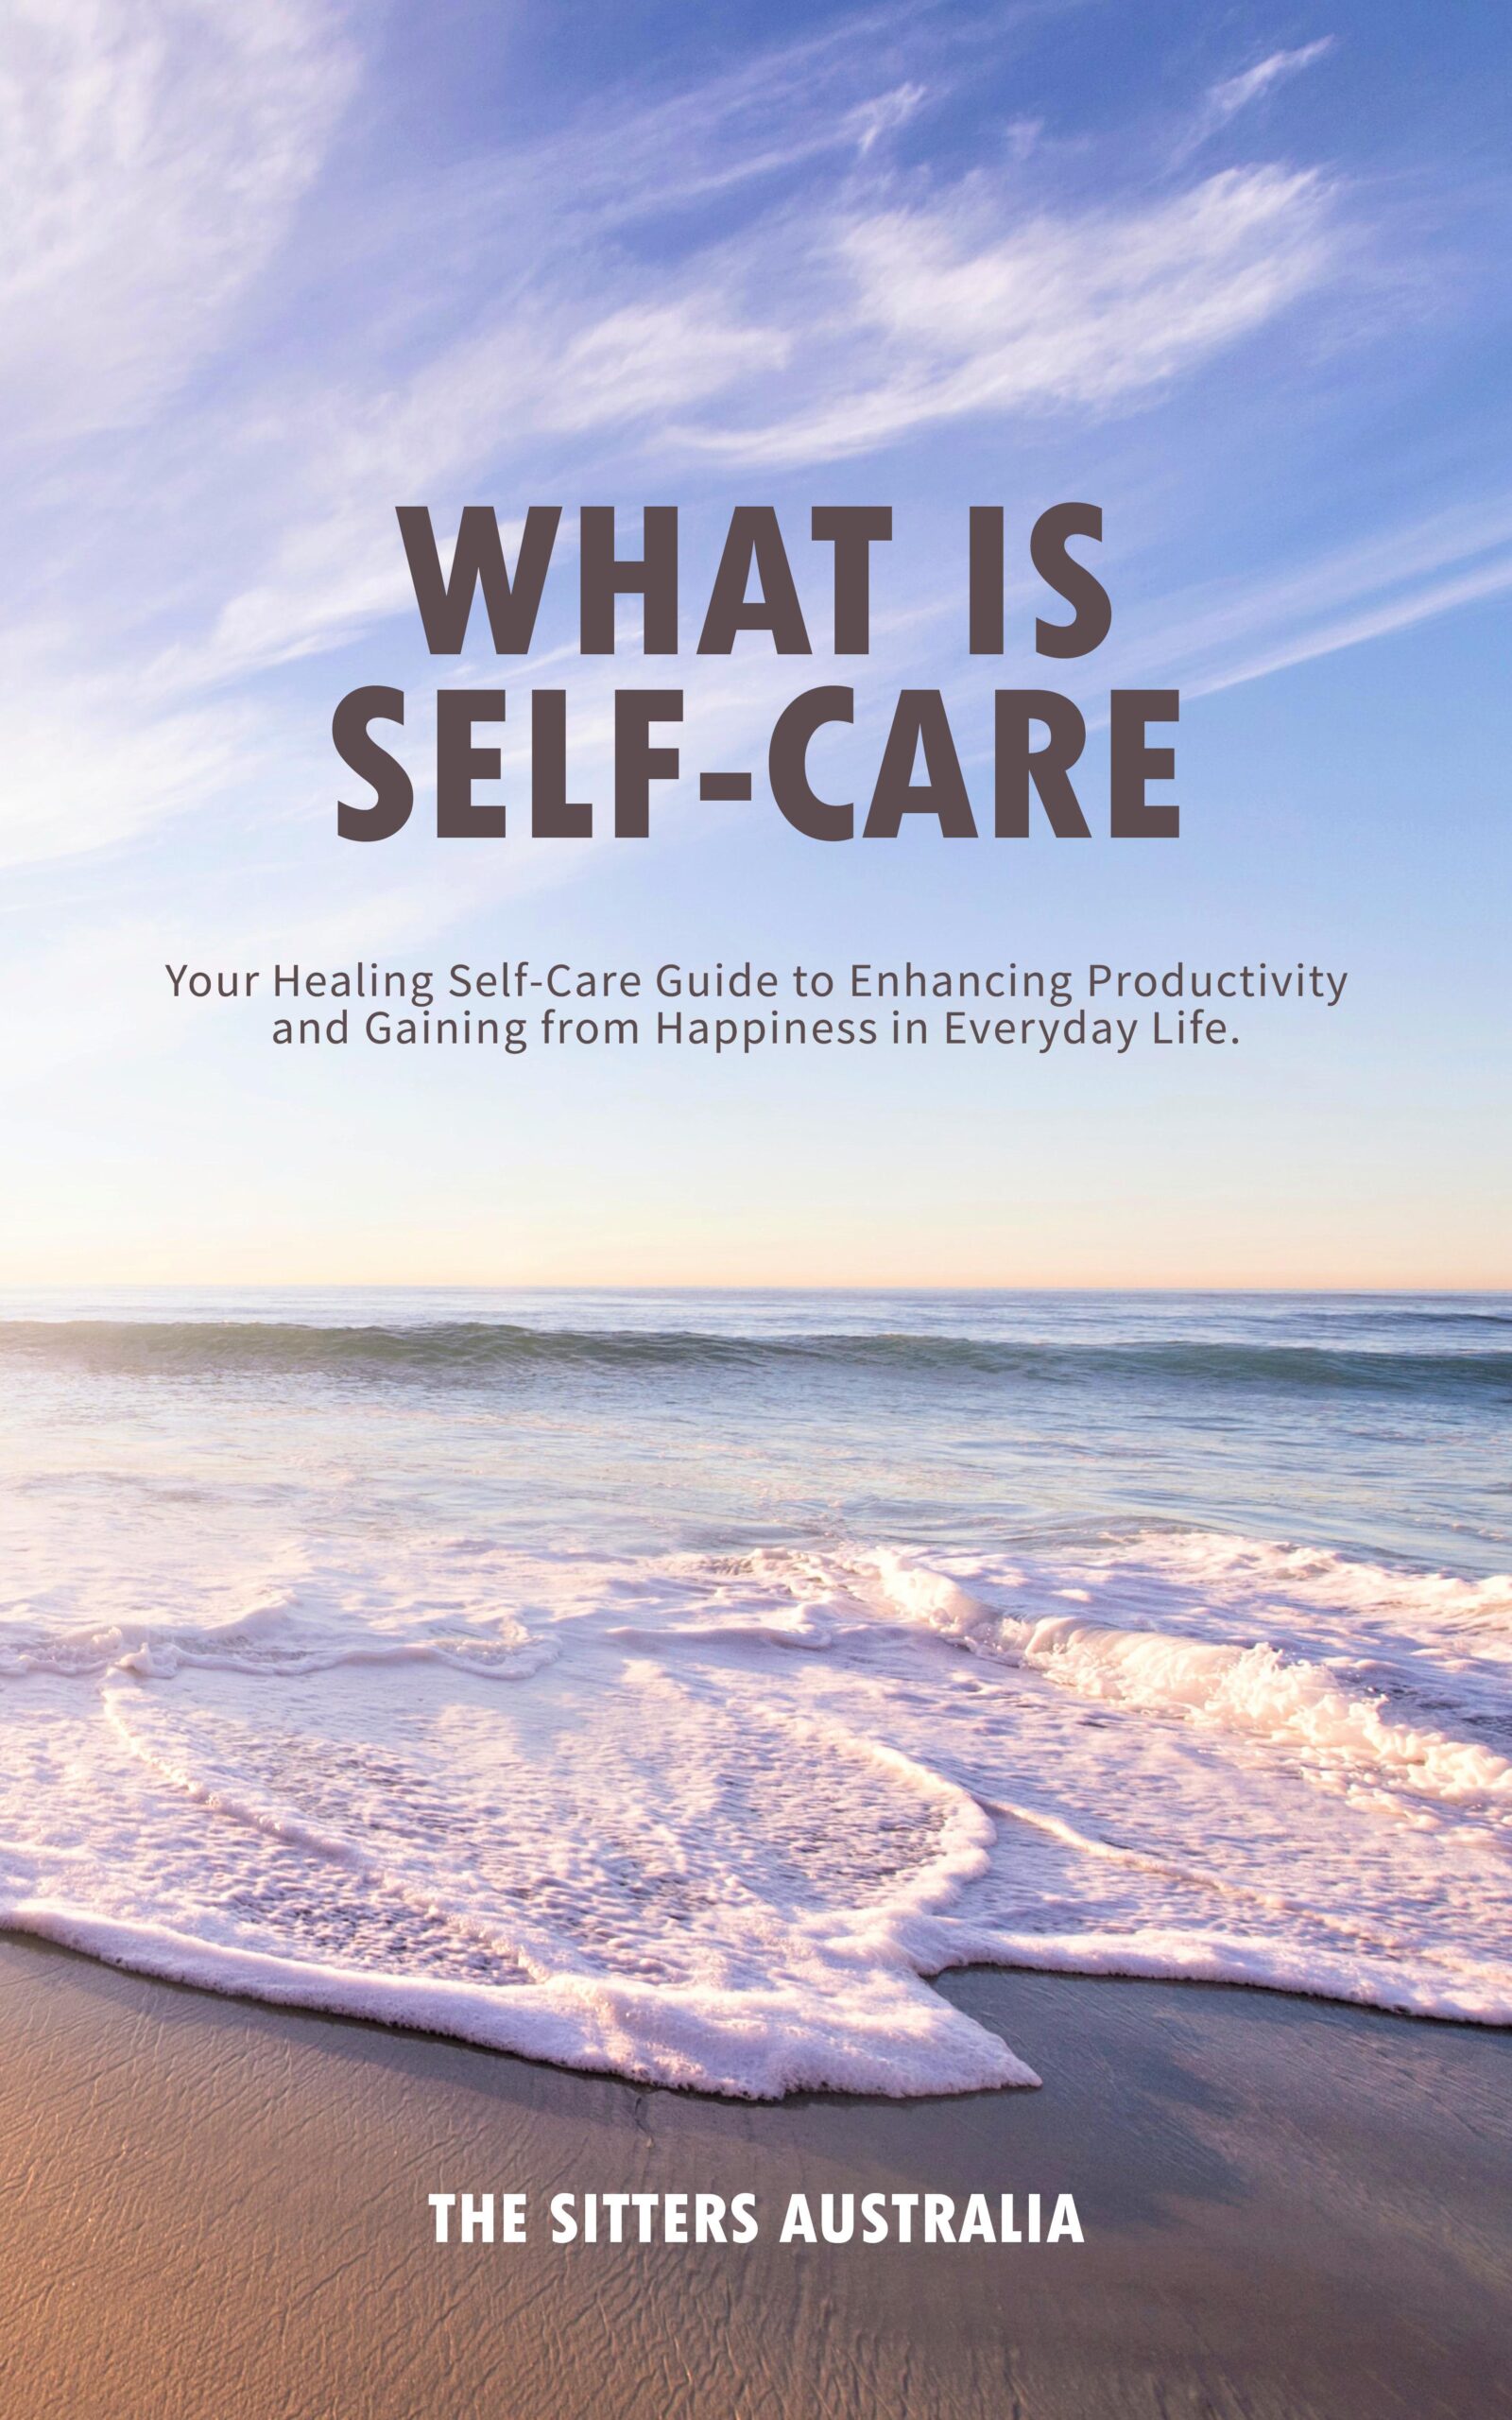 FREE: What is Self-Care by The Sitters Australia